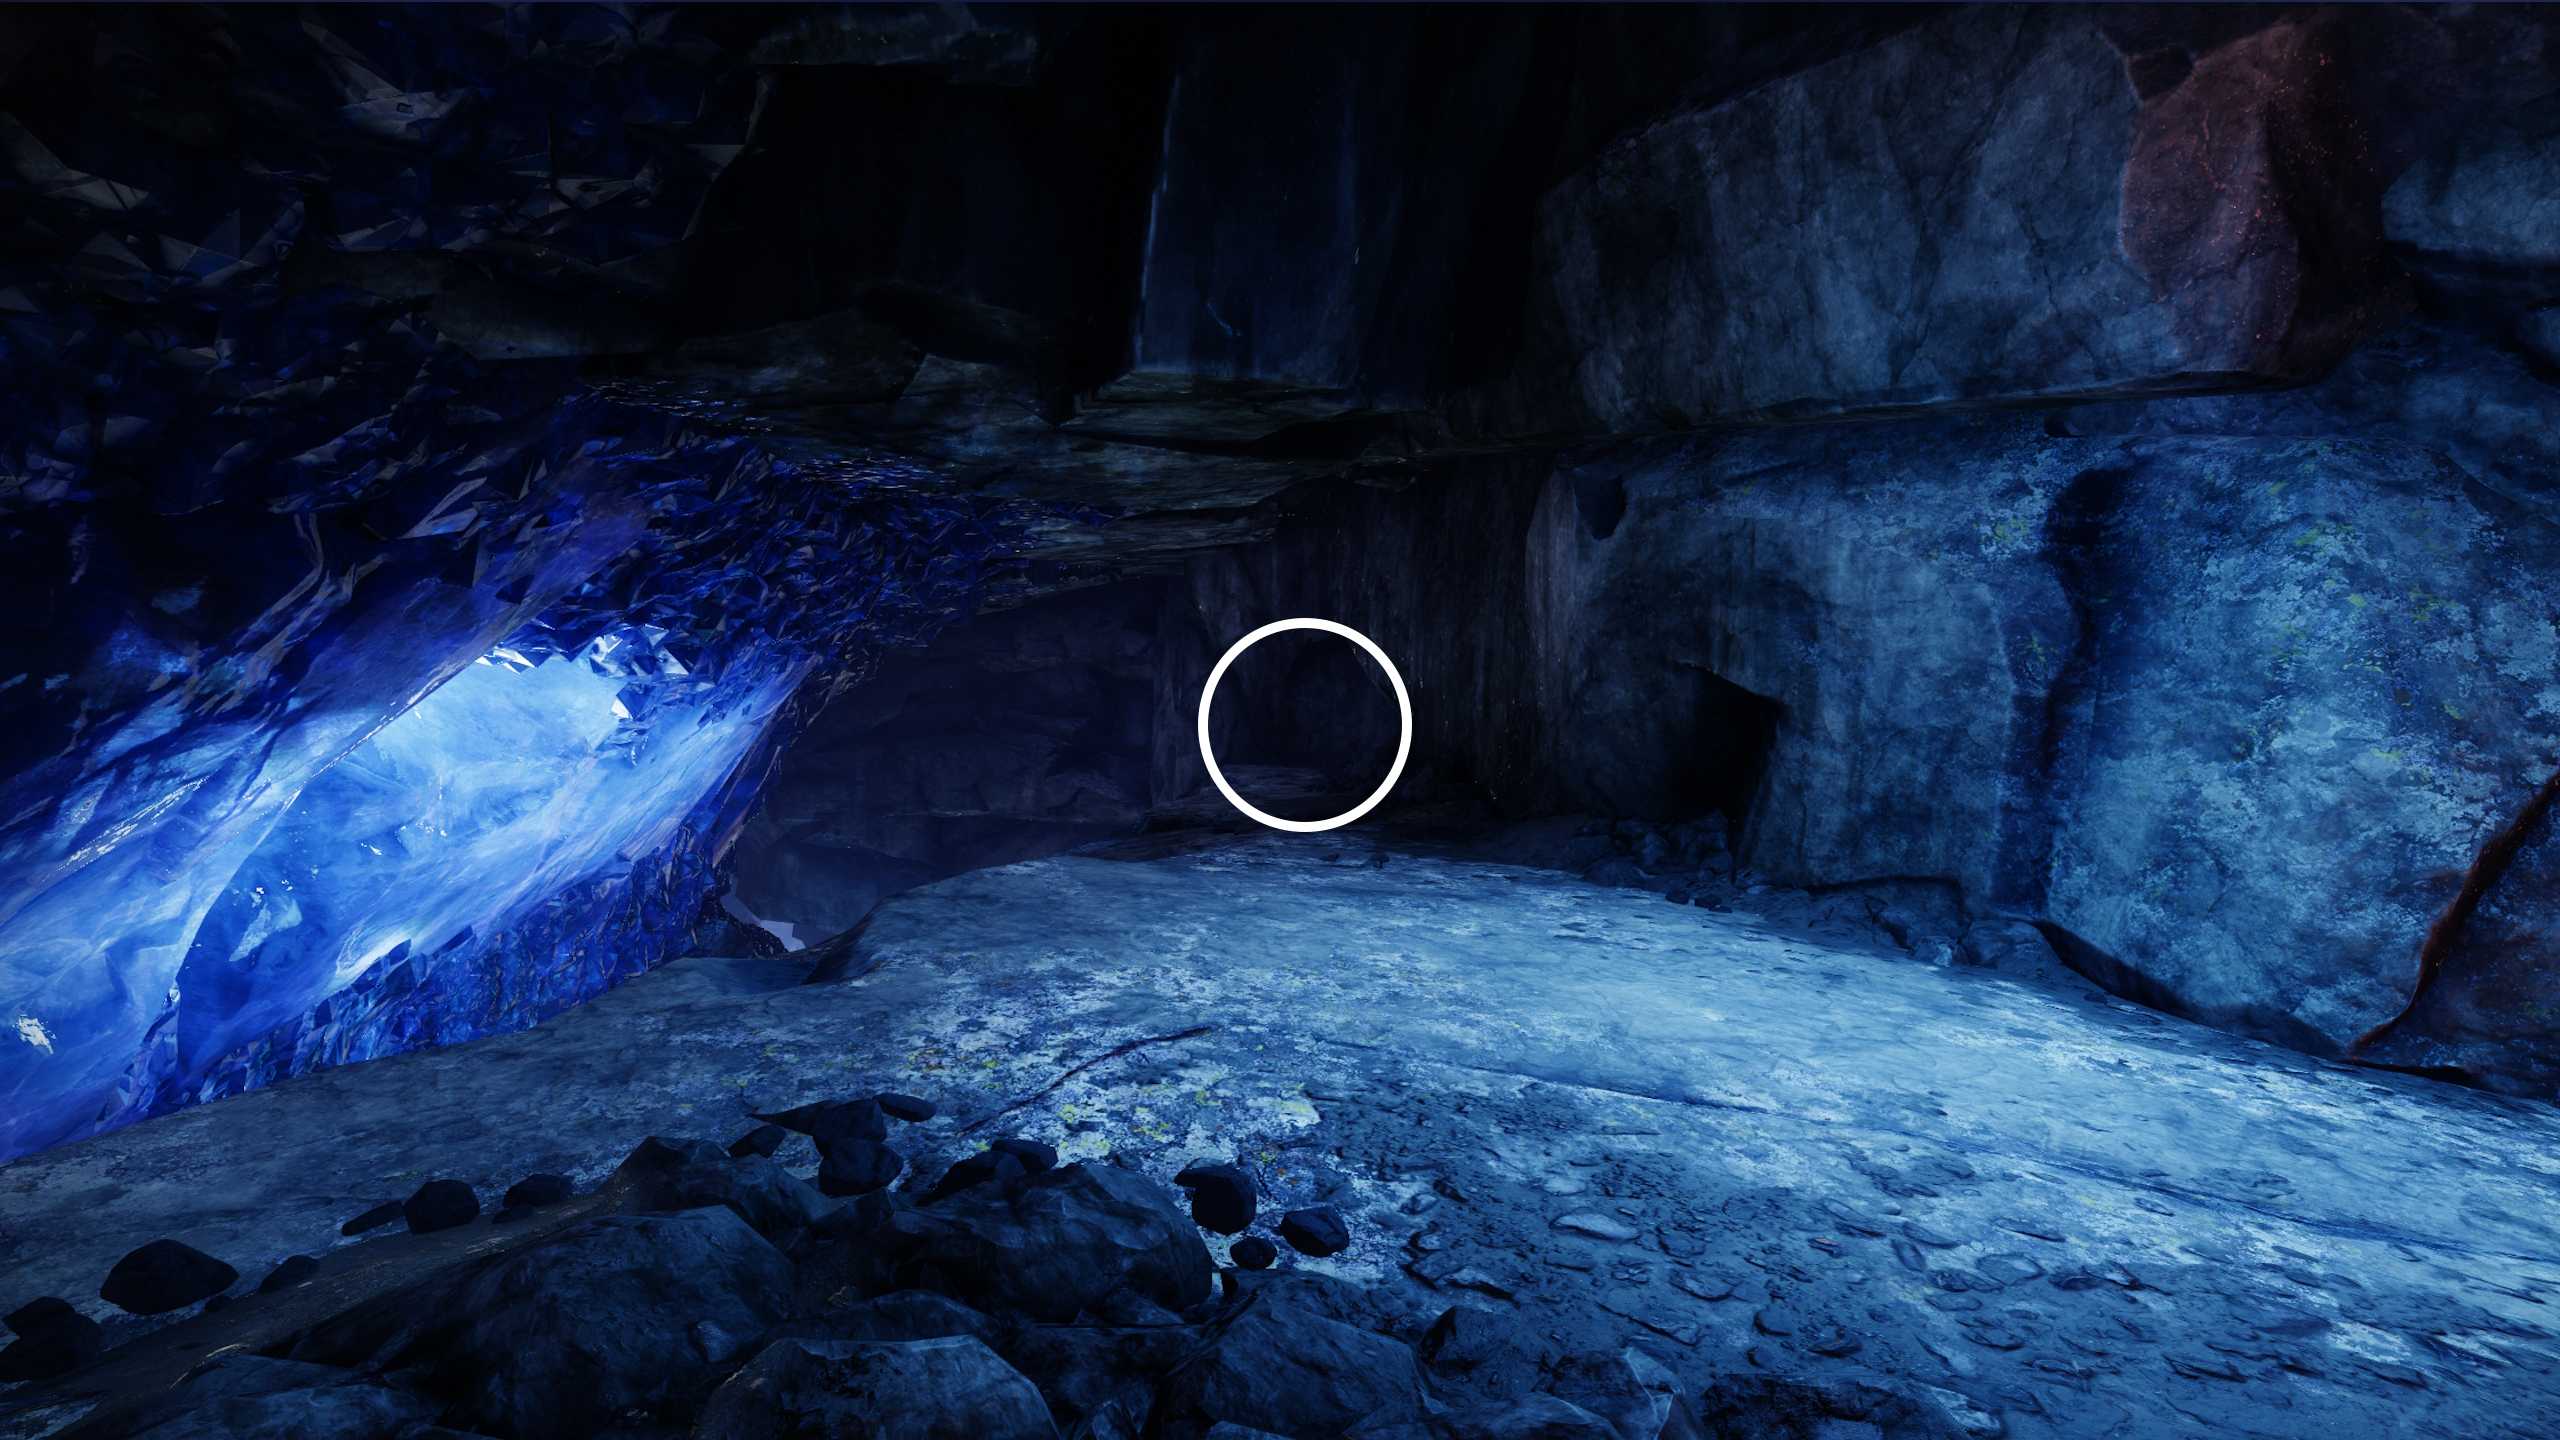 Location where the Aphelion's Rest lost sector Ascendant Chest appears.